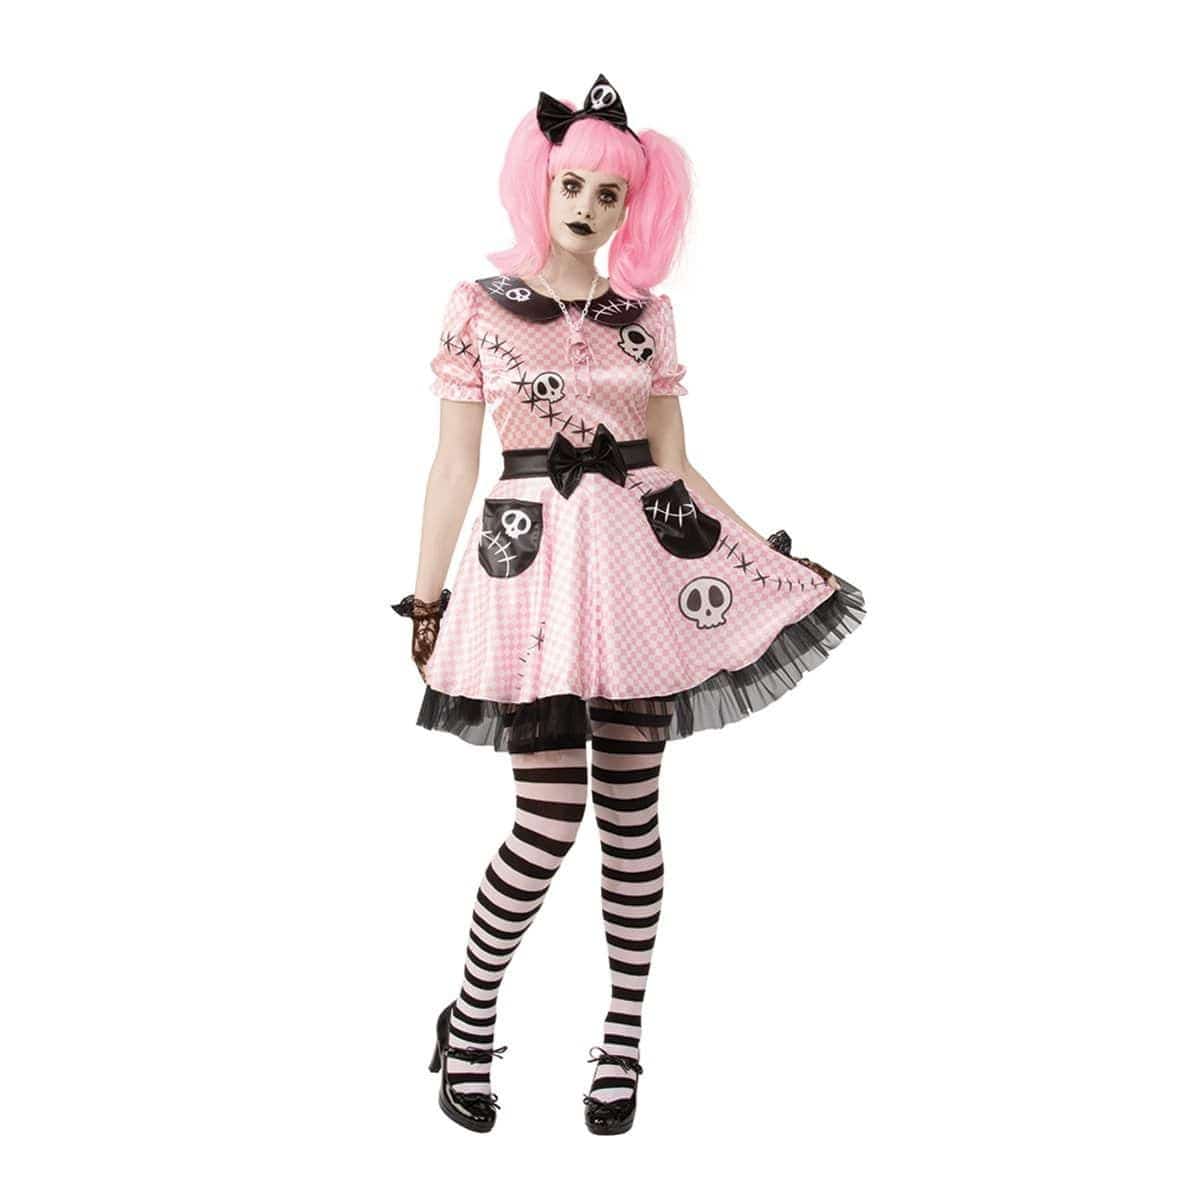 Buy Costumes Pink Skelly Doll Costume for Adults sold at Party Expert